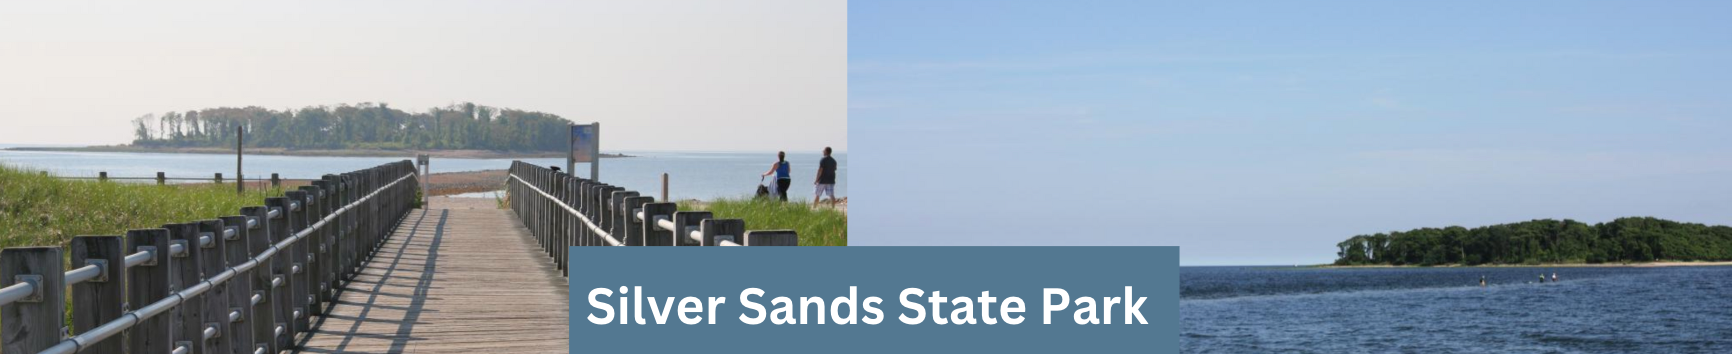 Silver Sands State Park